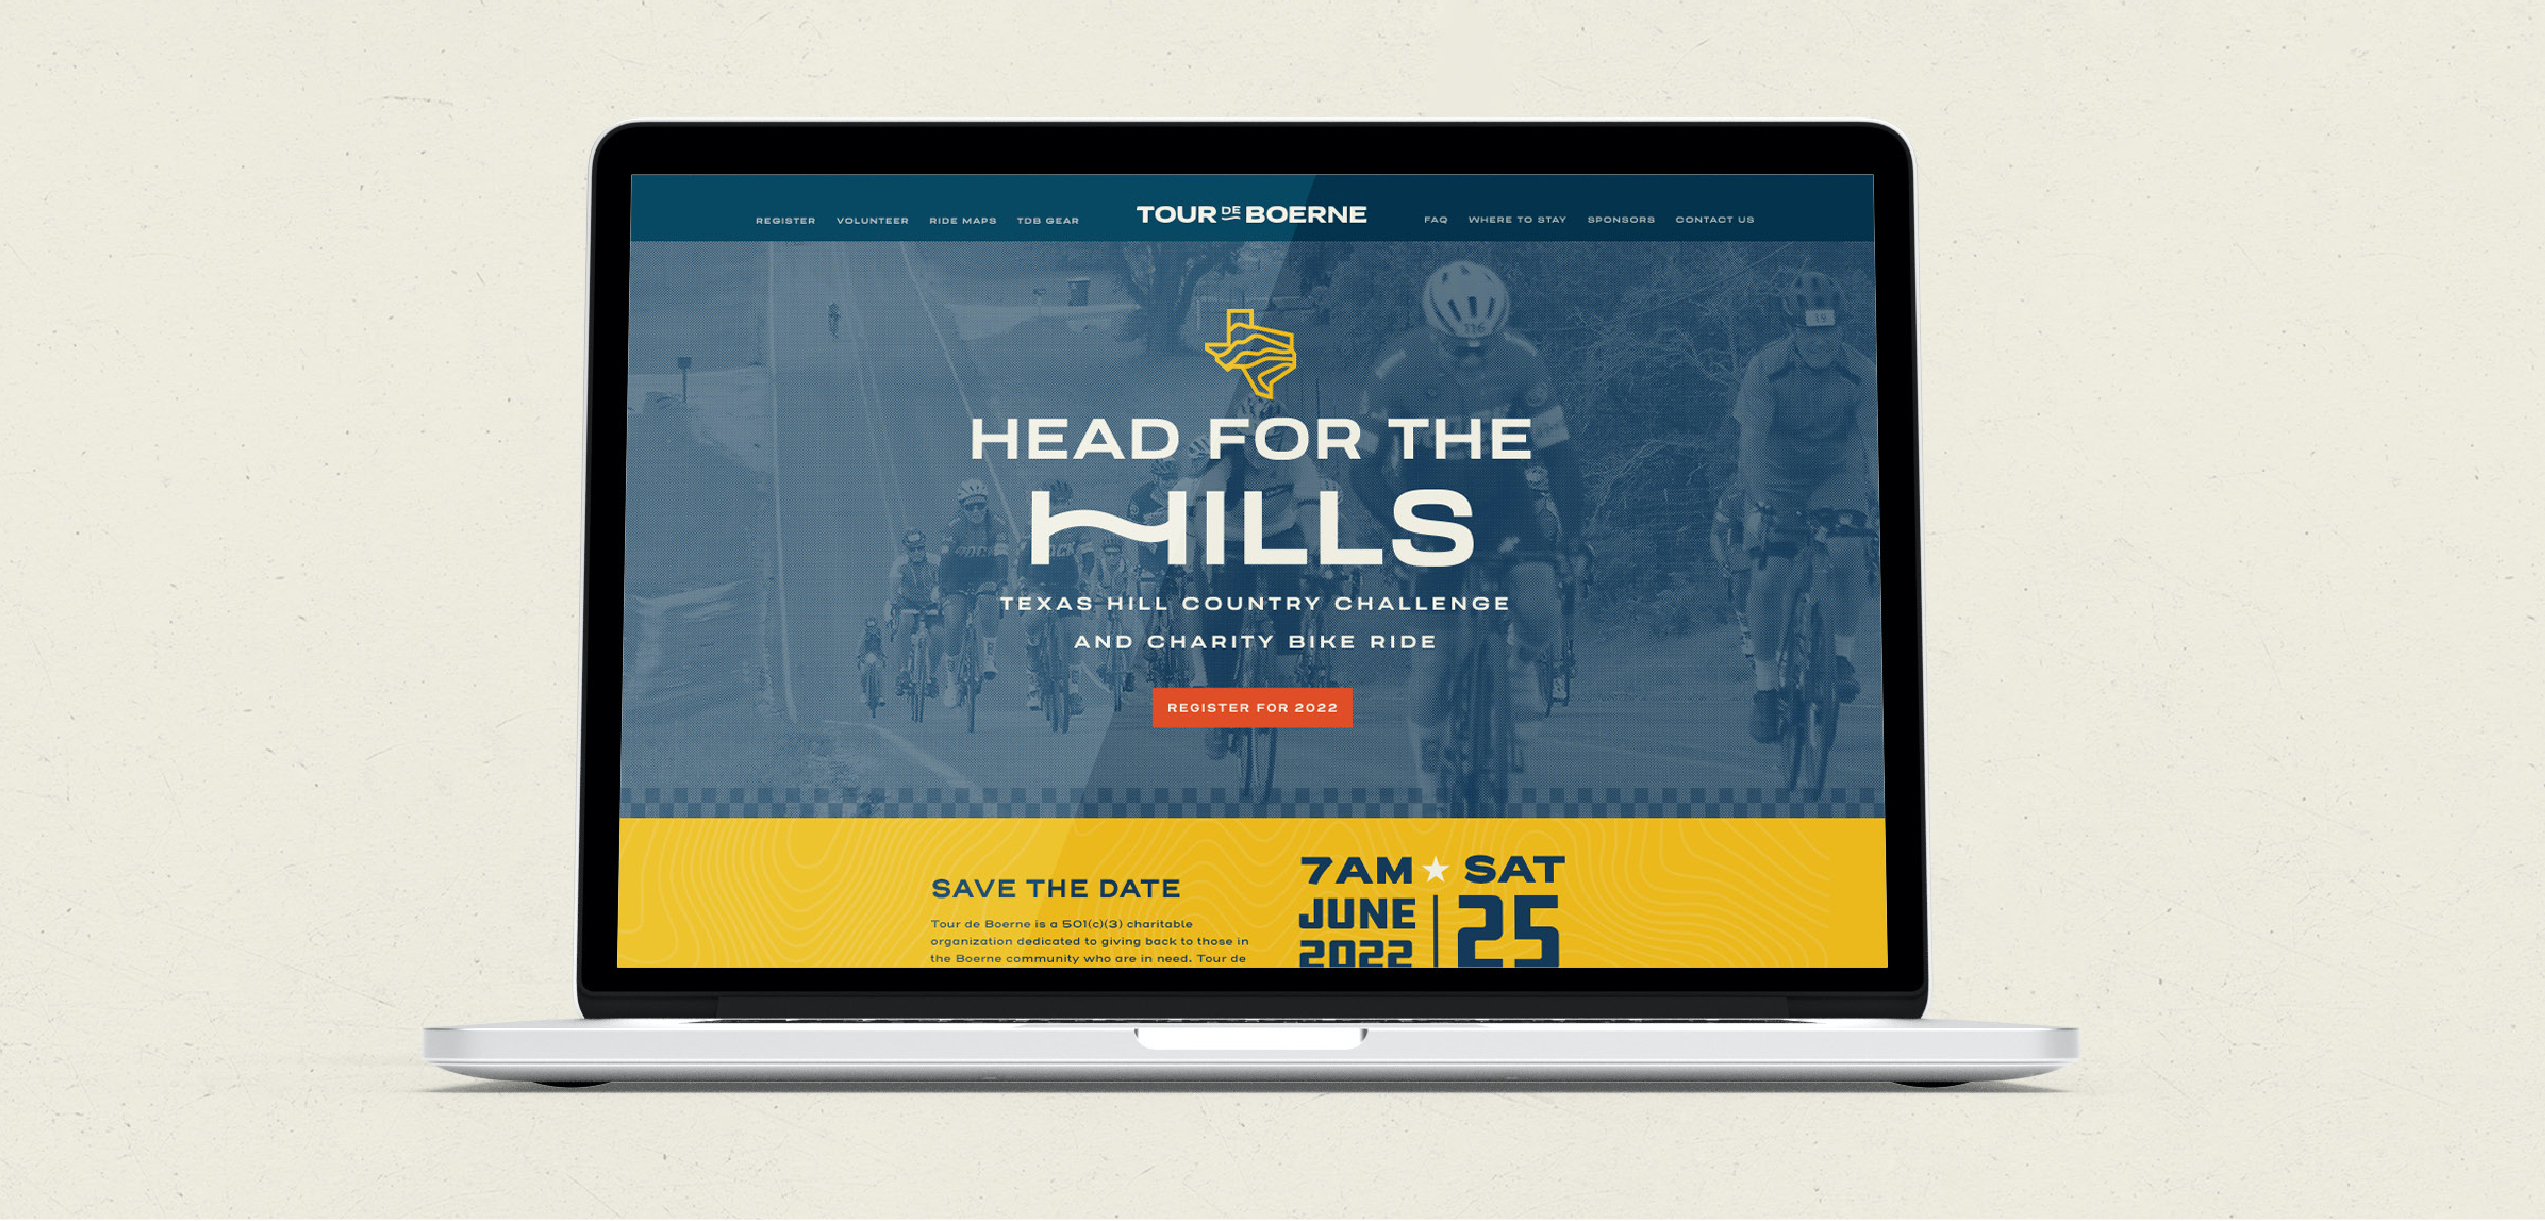 Showing a graphic featuring the Tour de Boerne website. Branding designed by MDR for this San Antonio-based organization.